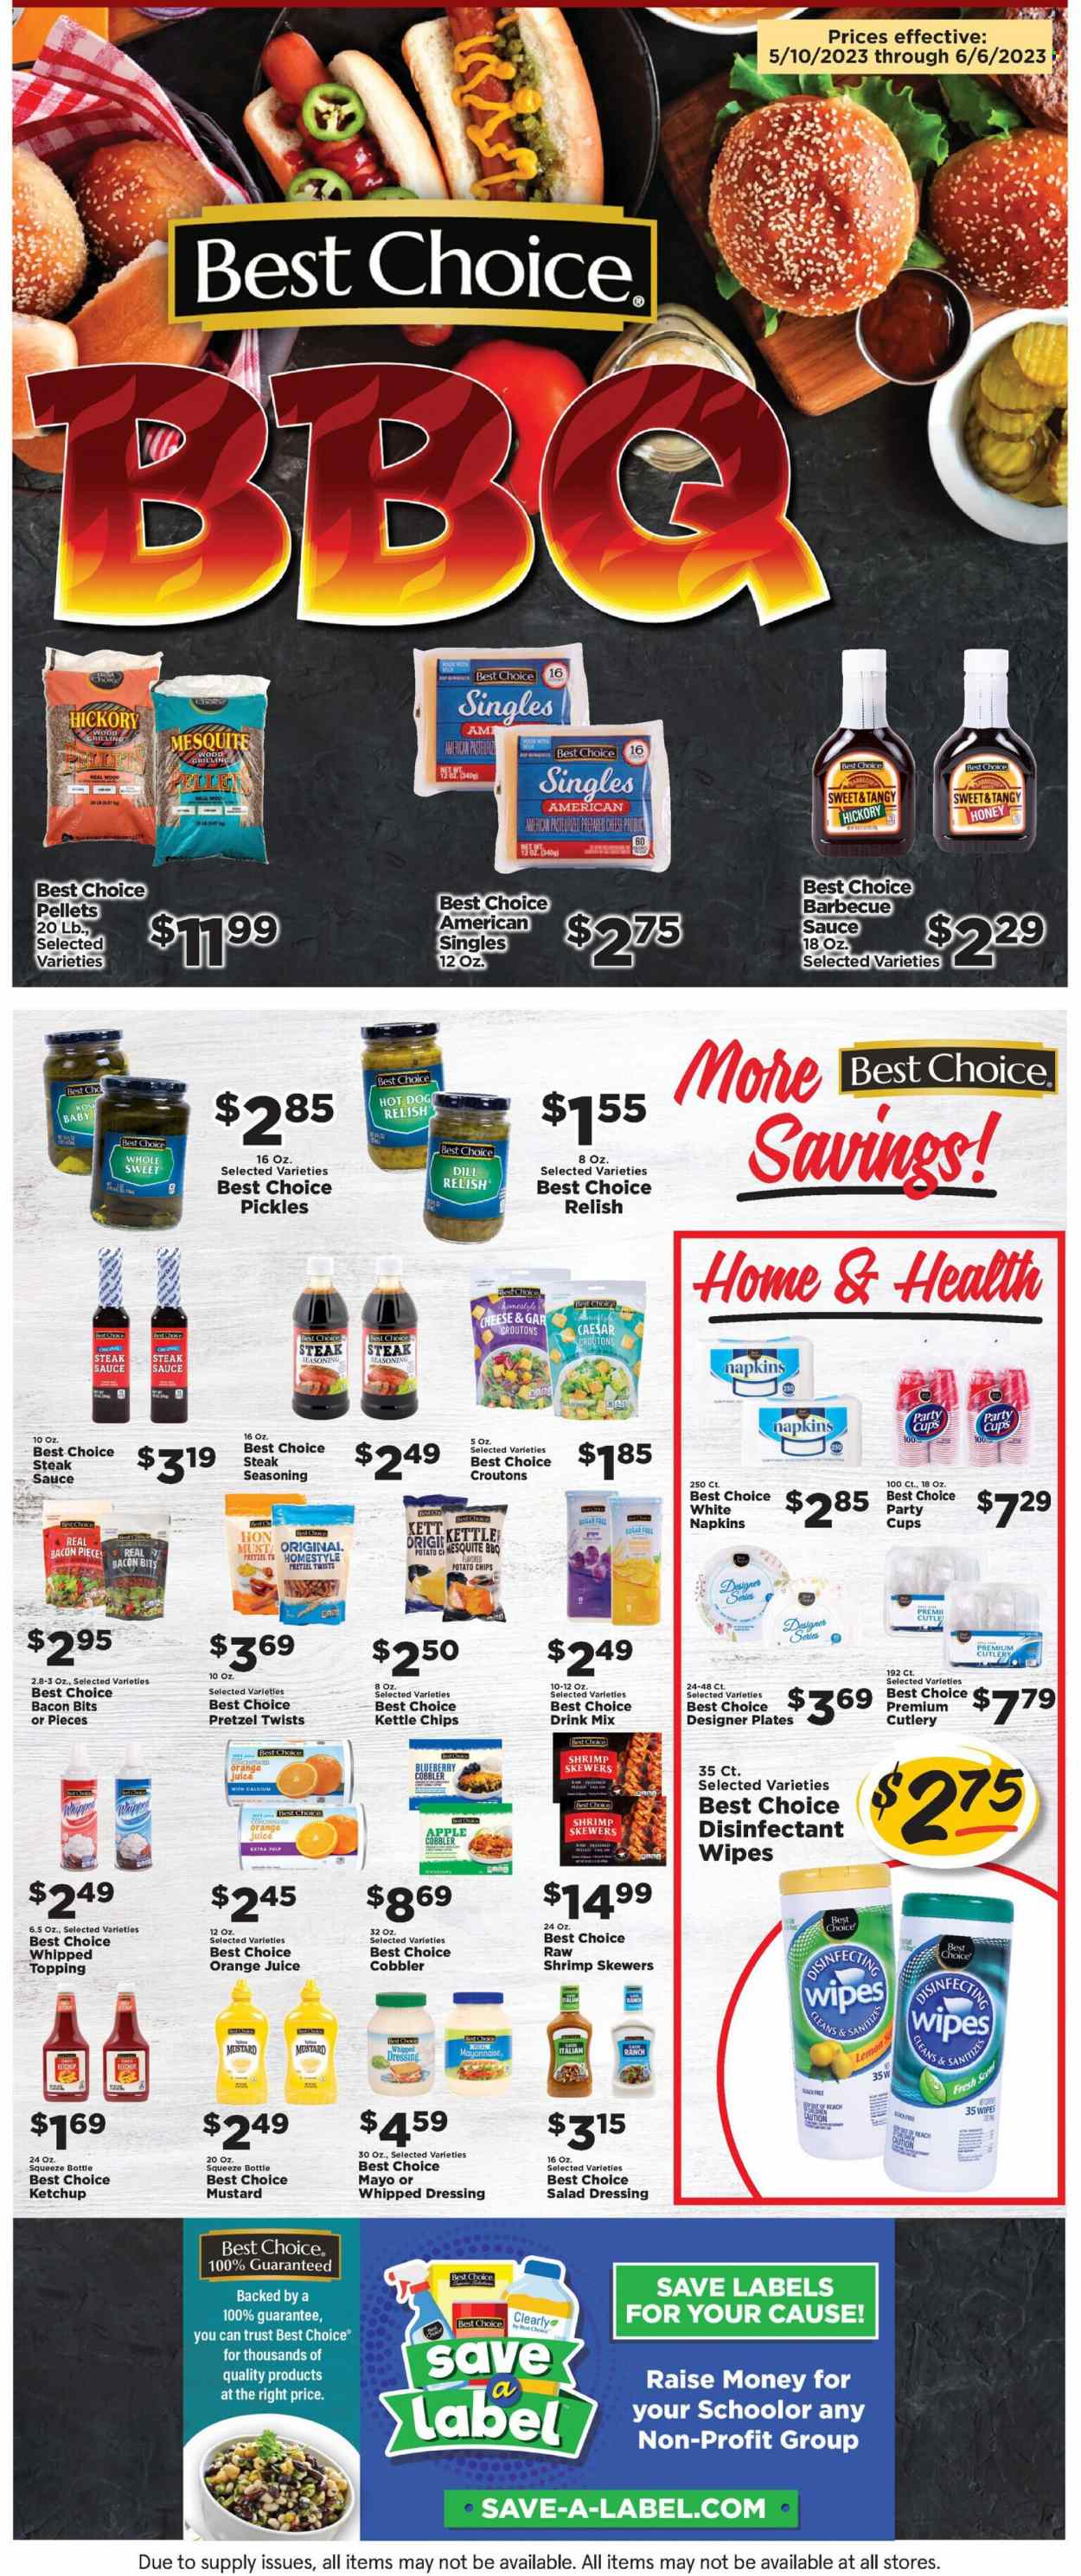 thumbnail - IGA Flyer - 05/24/2023 - 05/30/2023 - Sales products - pretzels, Ace, shrimps, hot dog, sauce, bacon bits, milk, mayonnaise, potato chips, chips, Kettle chips, croutons, topping, pickles, dill, spice, BBQ sauce, mustard, salad dressing, steak sauce, ketchup, dressing, honey, orange juice, juice, steak, cleansing wipes, wipes, napkins, desinfection, plate, cup, party cups, calcium. Page 9.